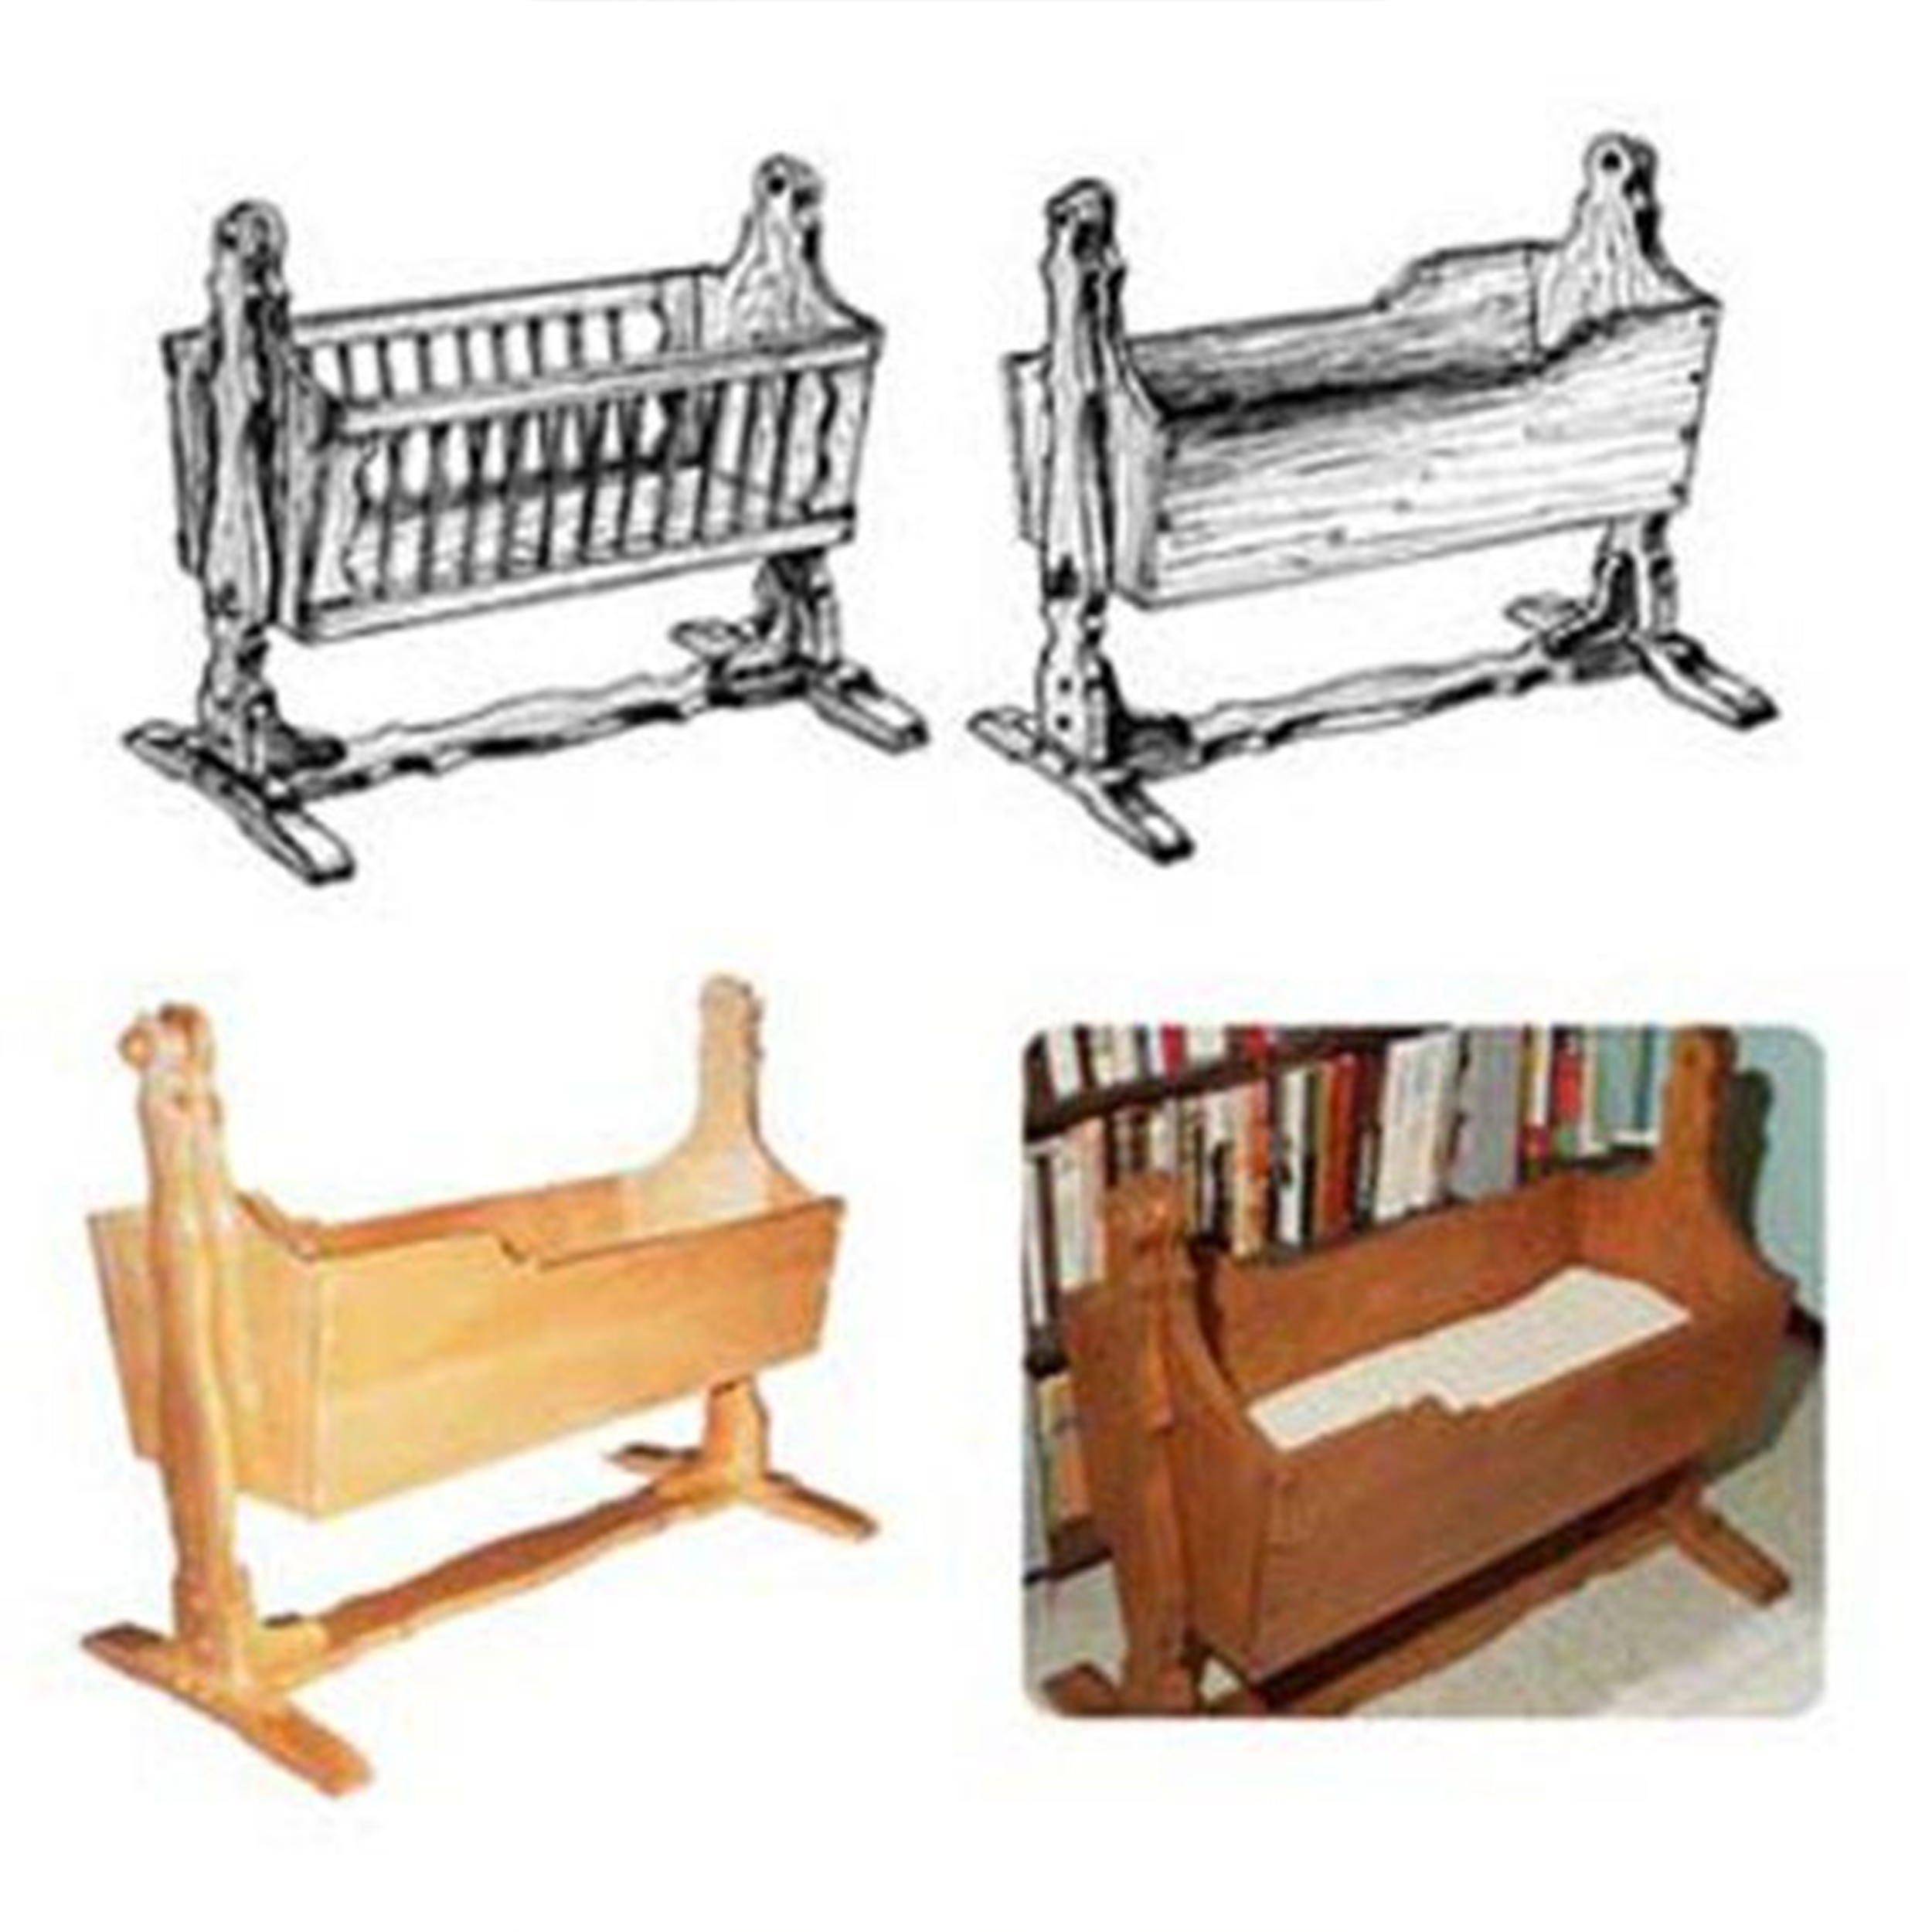 Woodworking Project Paper Plan To Build Mission American Baby Cradle